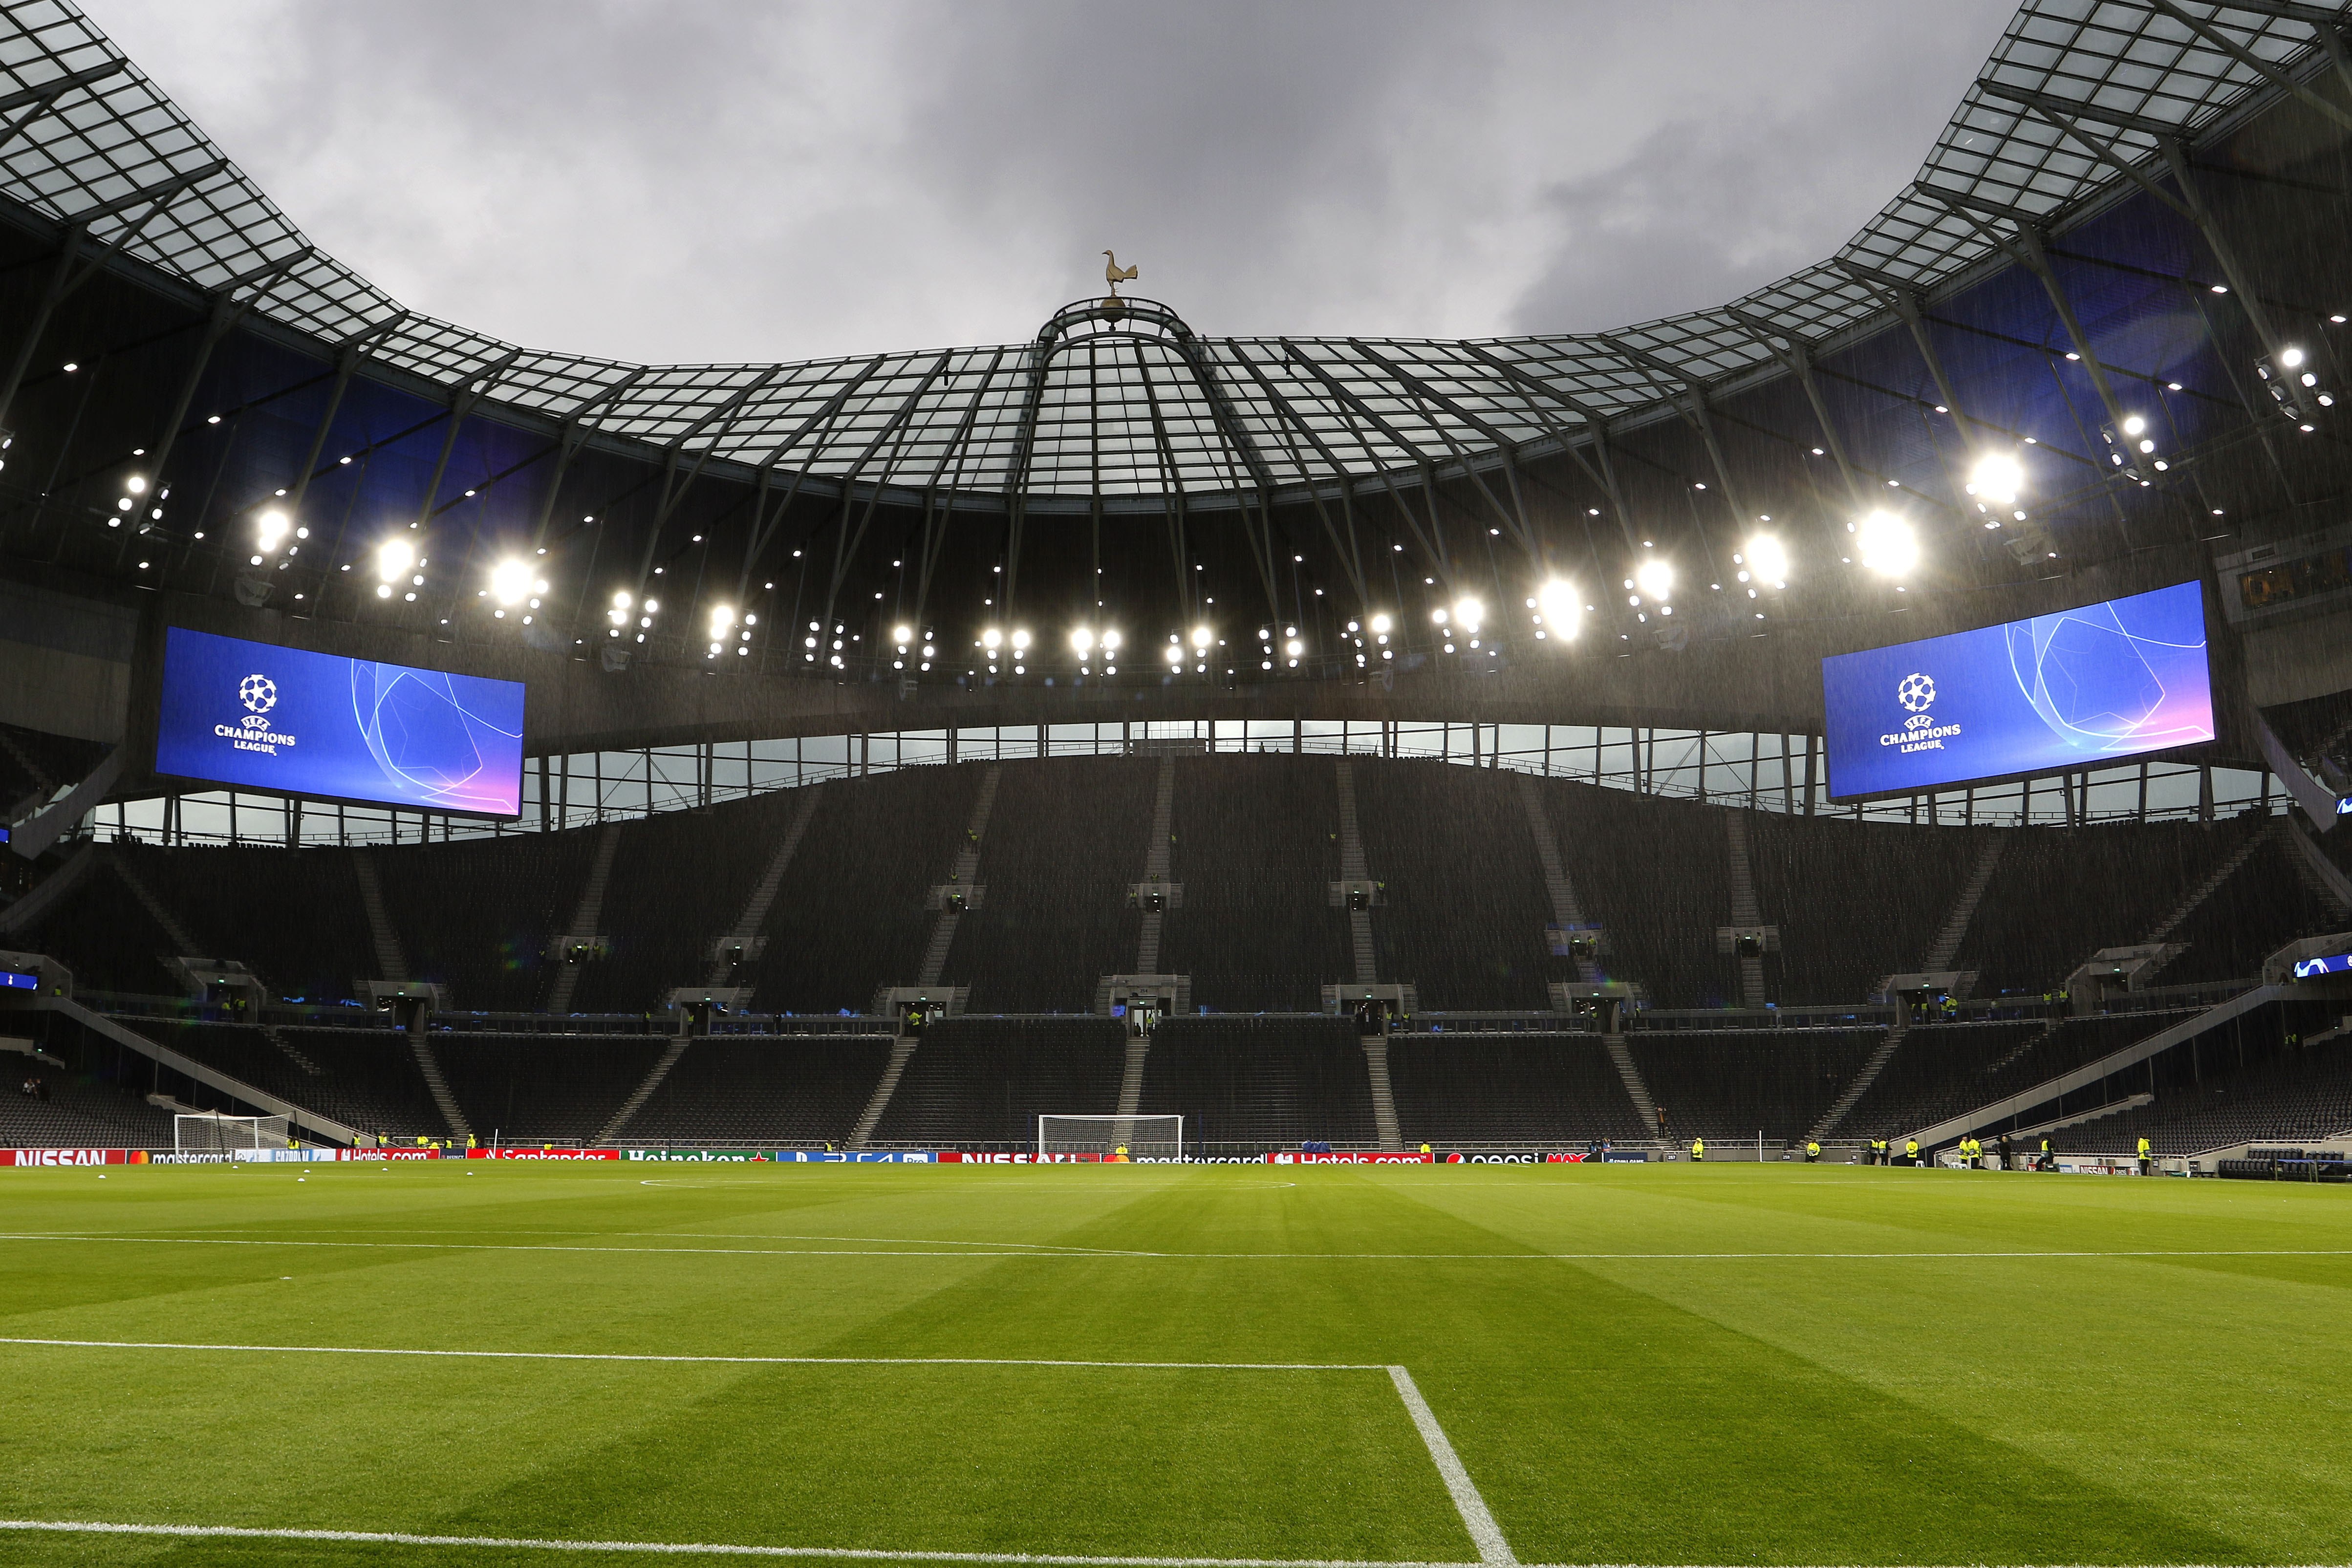 A general view from the Tottenham Hotspur Stadium ahead of a Champions League game against Bayern Munich in 2019